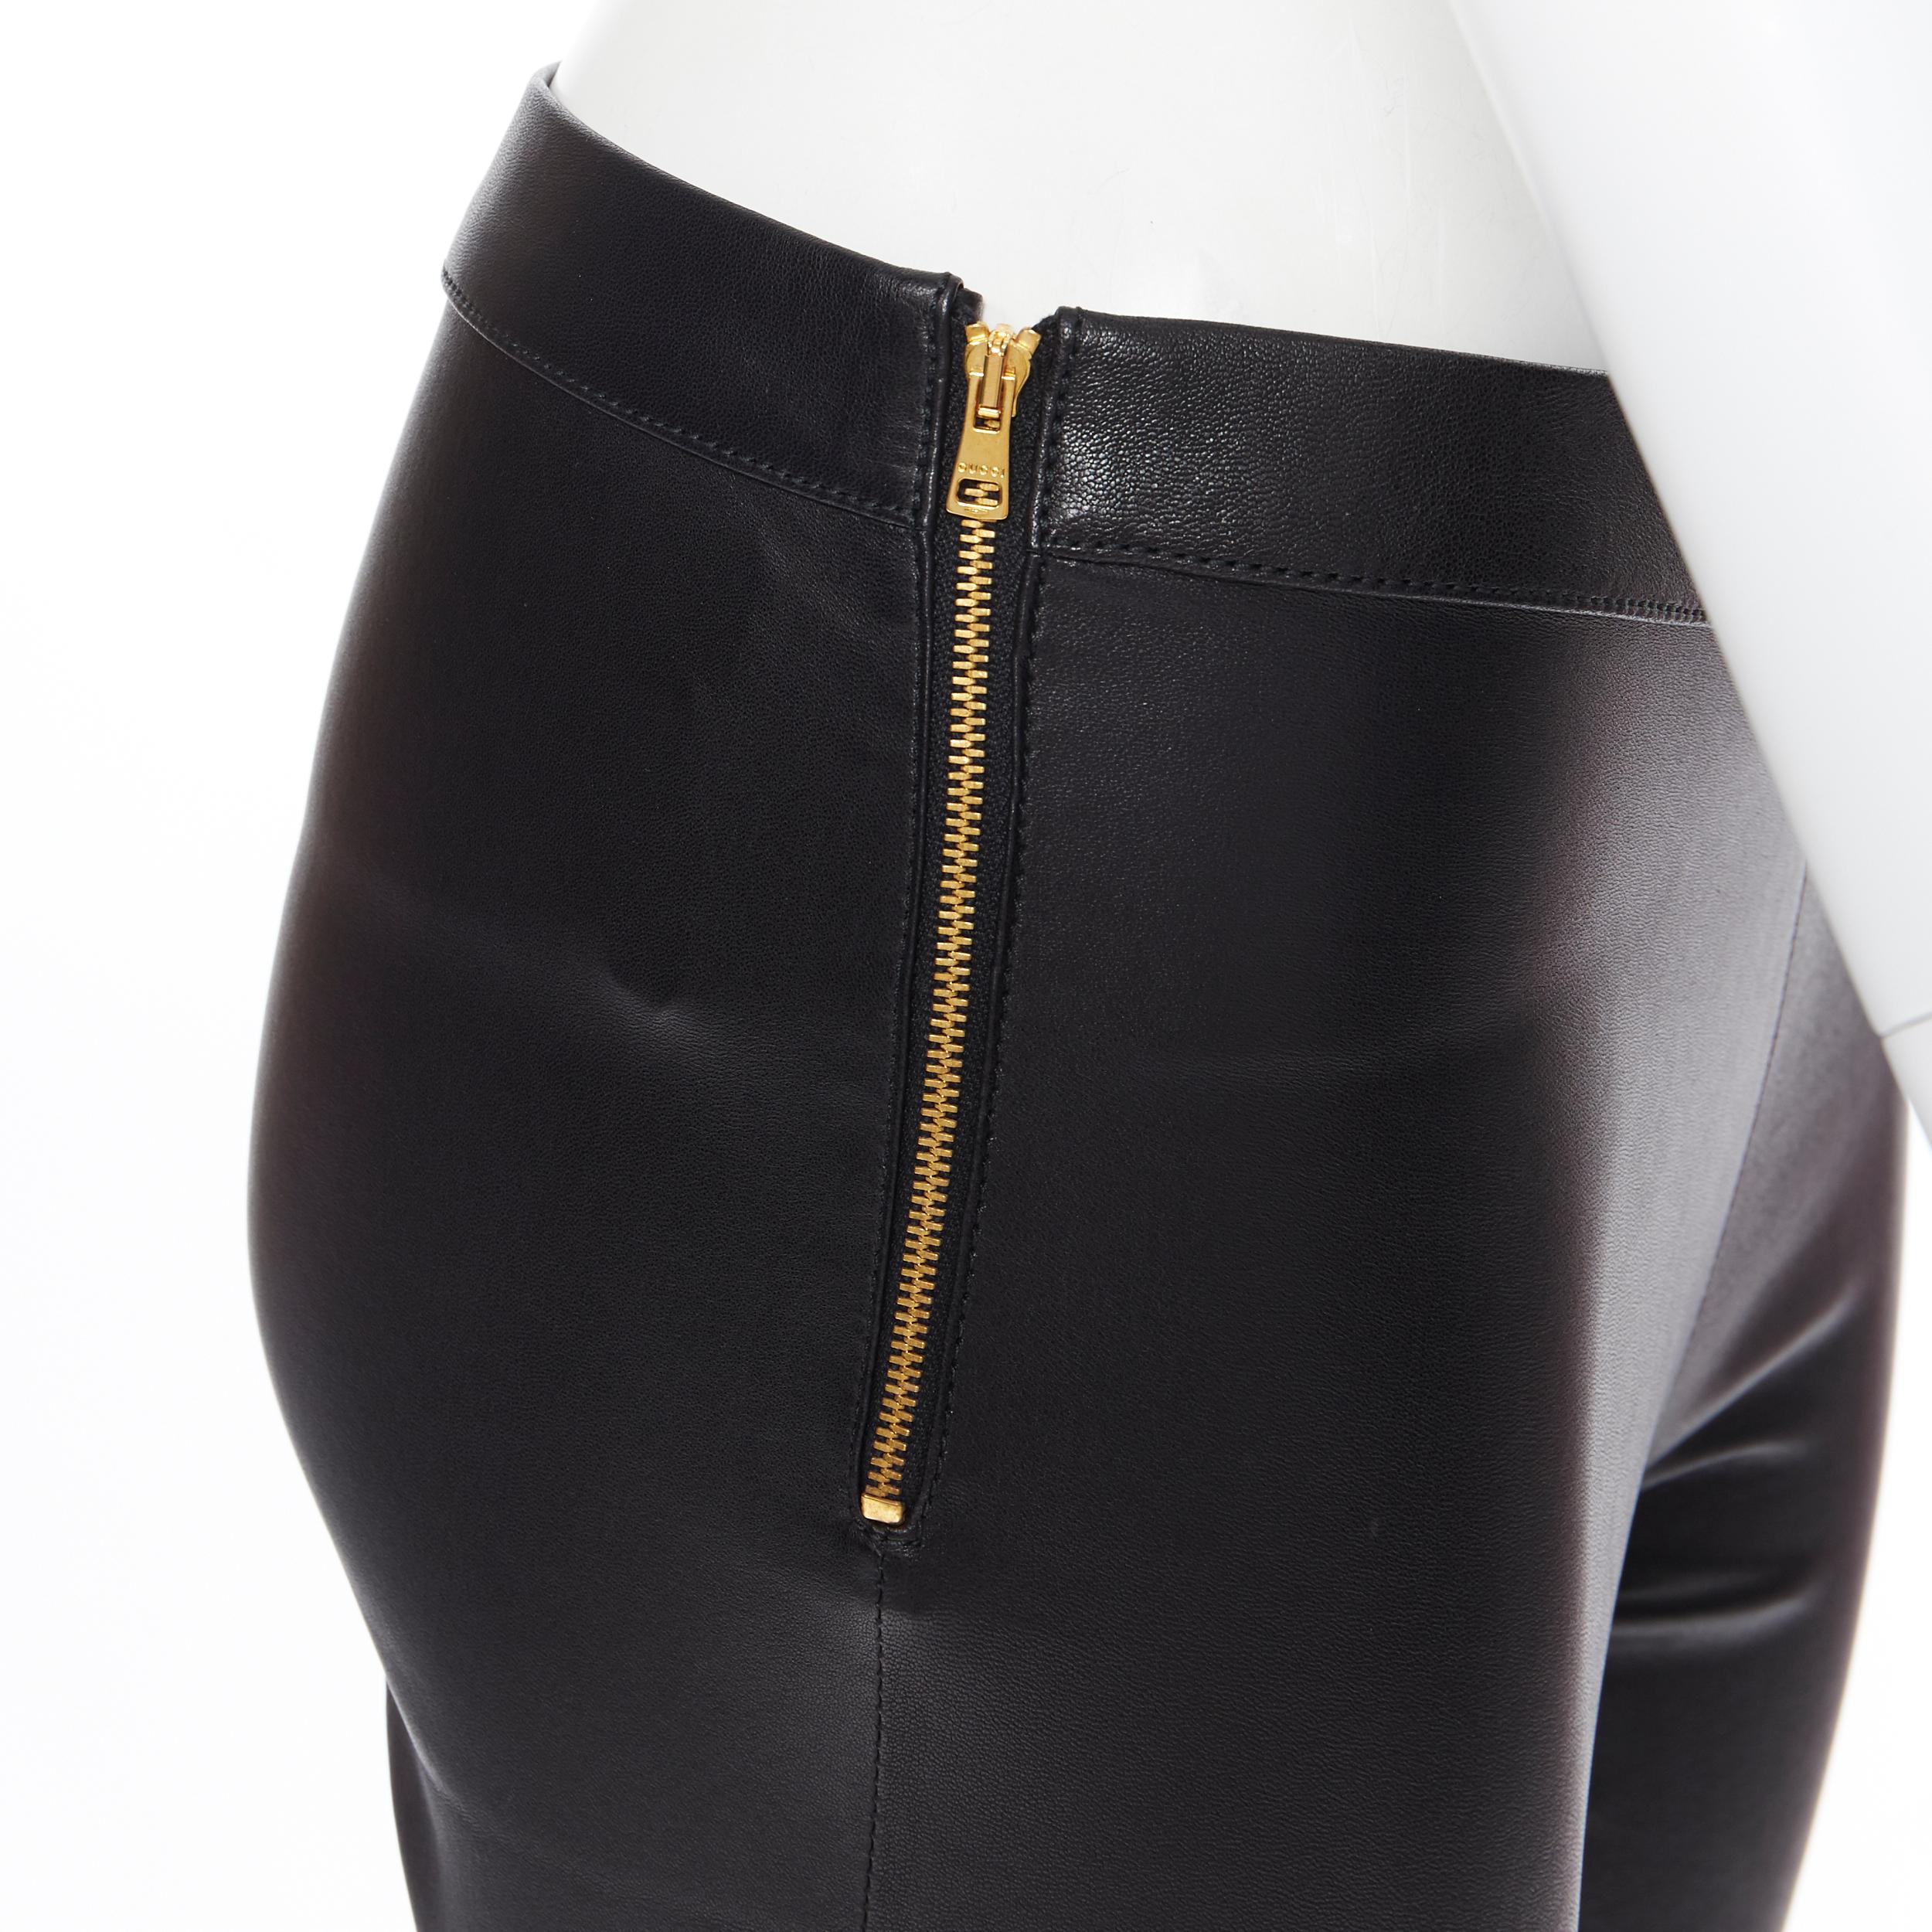 GUCCI 100% leather black gold zip side minimal stretchy skinng leg pants IT36 XS
Brand: Gucci
Model Name / Style: Leather pants
Material: Leather
Color: Black
Pattern: Solid
Extra Detail: Gold-tone side zip closure. Mid rise. Skinny leg.
Made in: